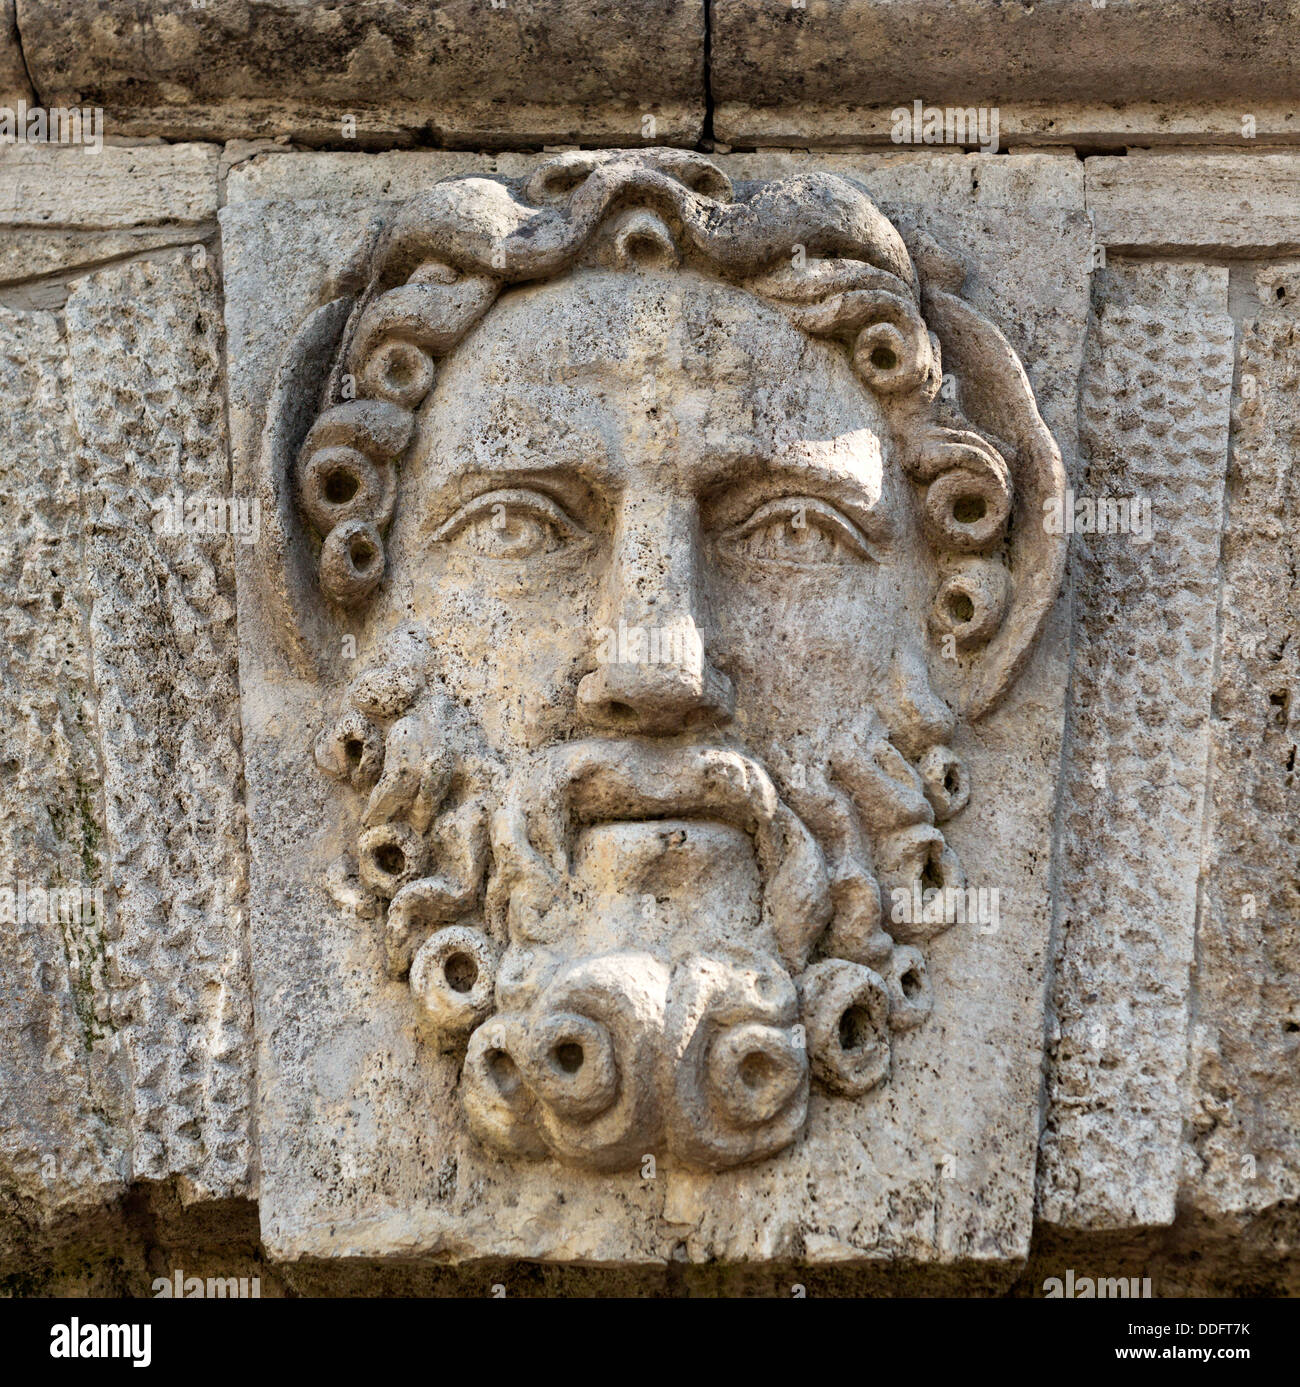 sculpture in stone face with a beard close-up Stock Photo